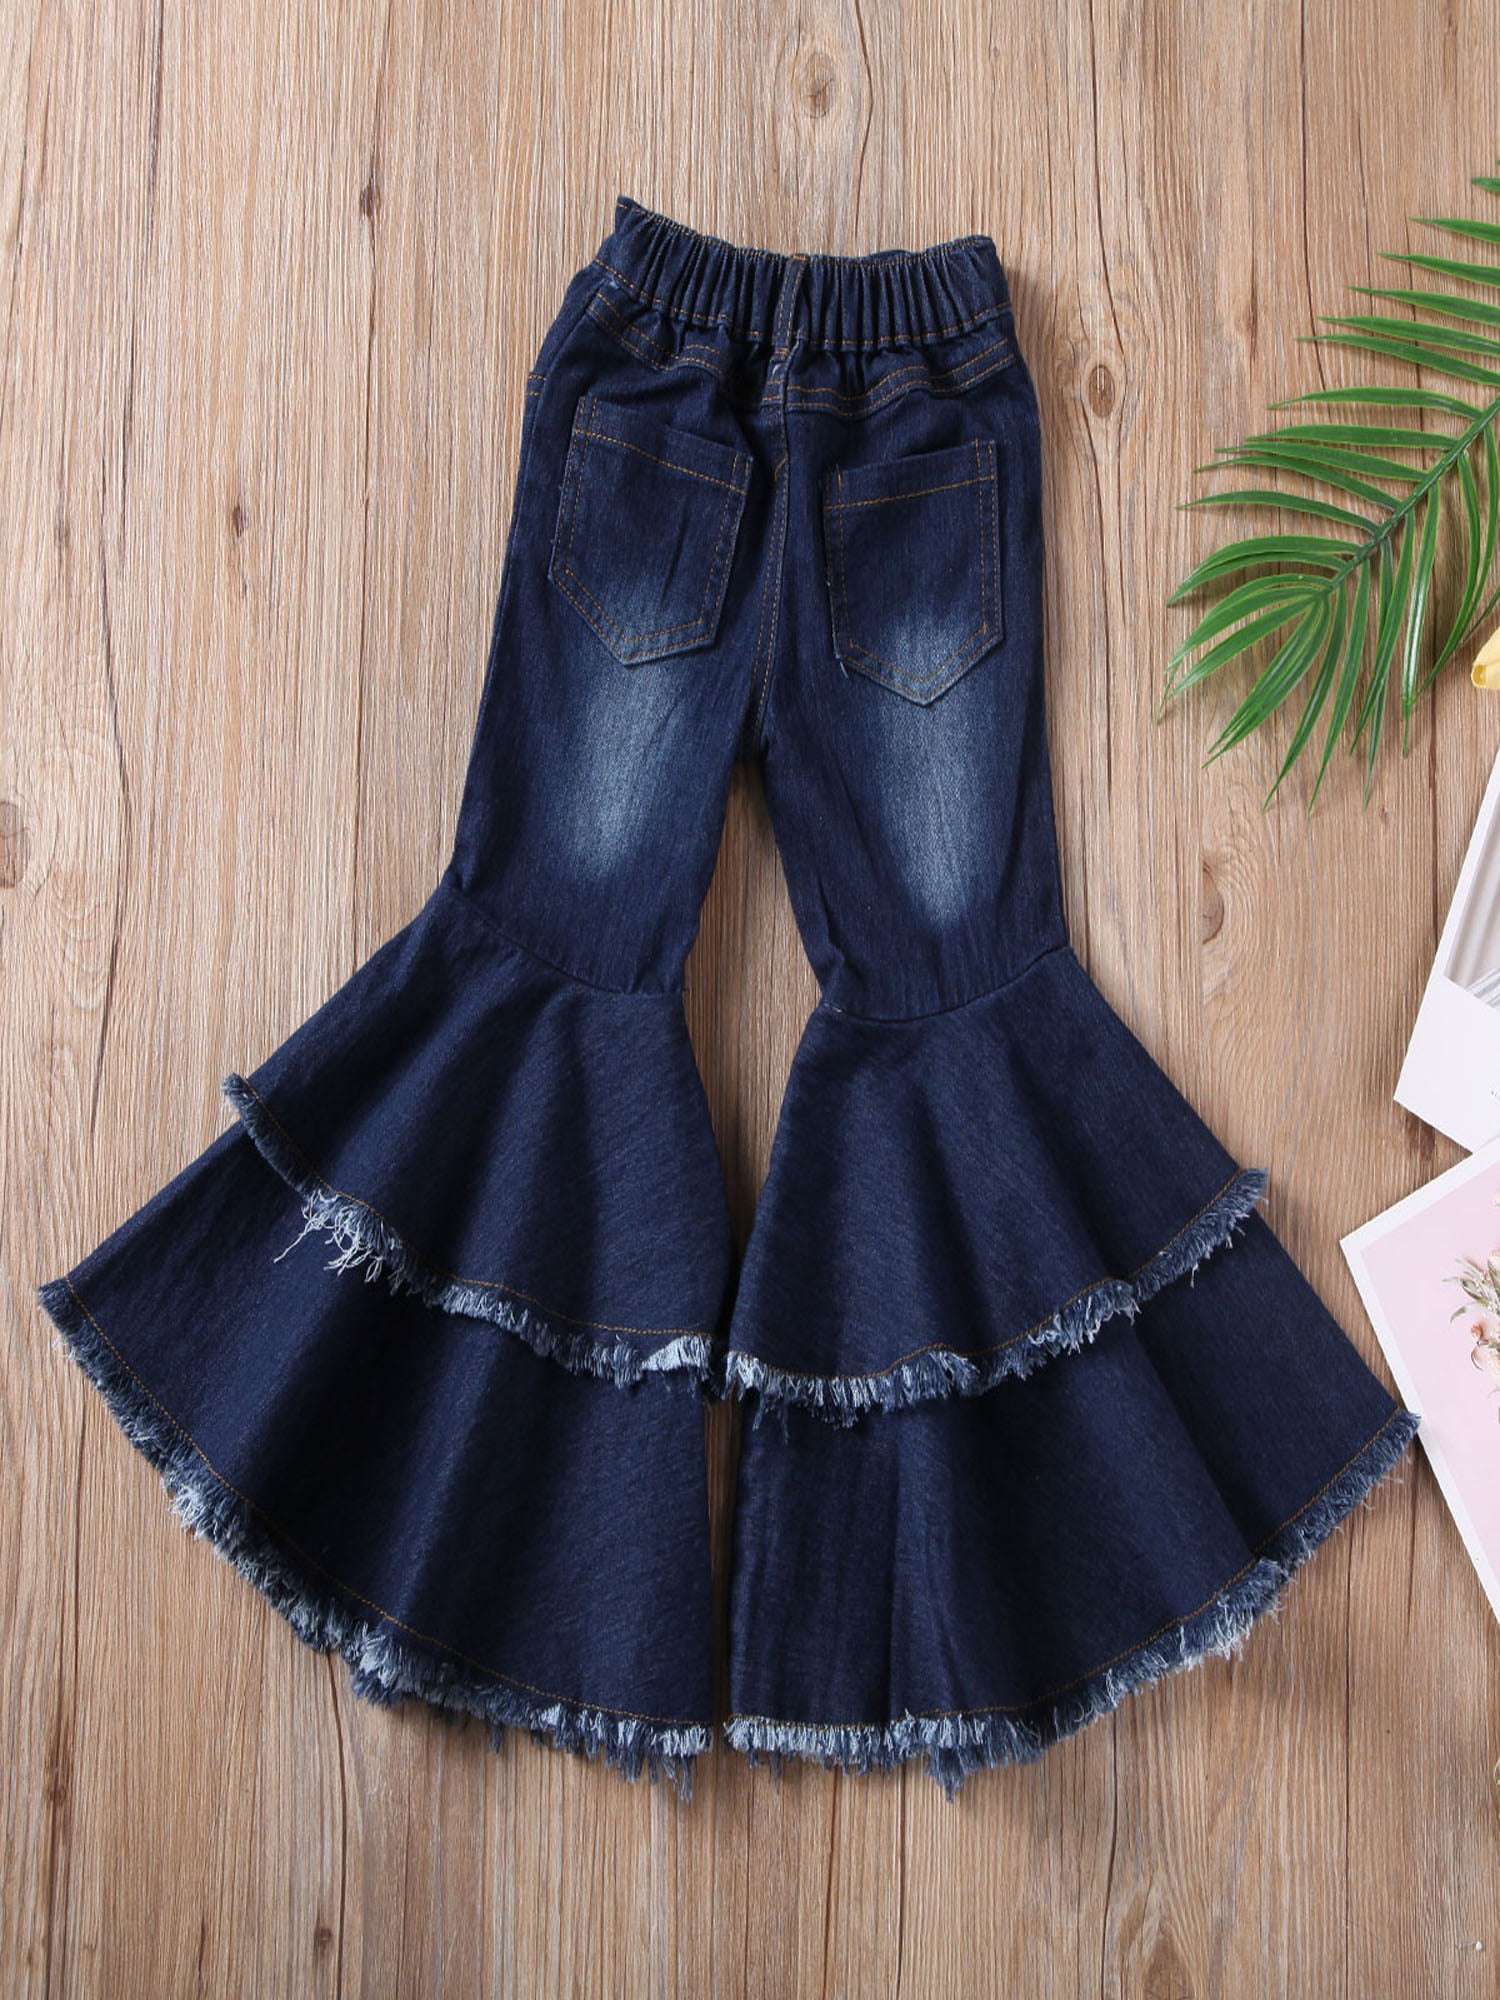 TAOHONG Toddler Baby Girl Flared Jeans Ripped Trousers Bell-Bottom Denim Pants Spring Fall Clothes 